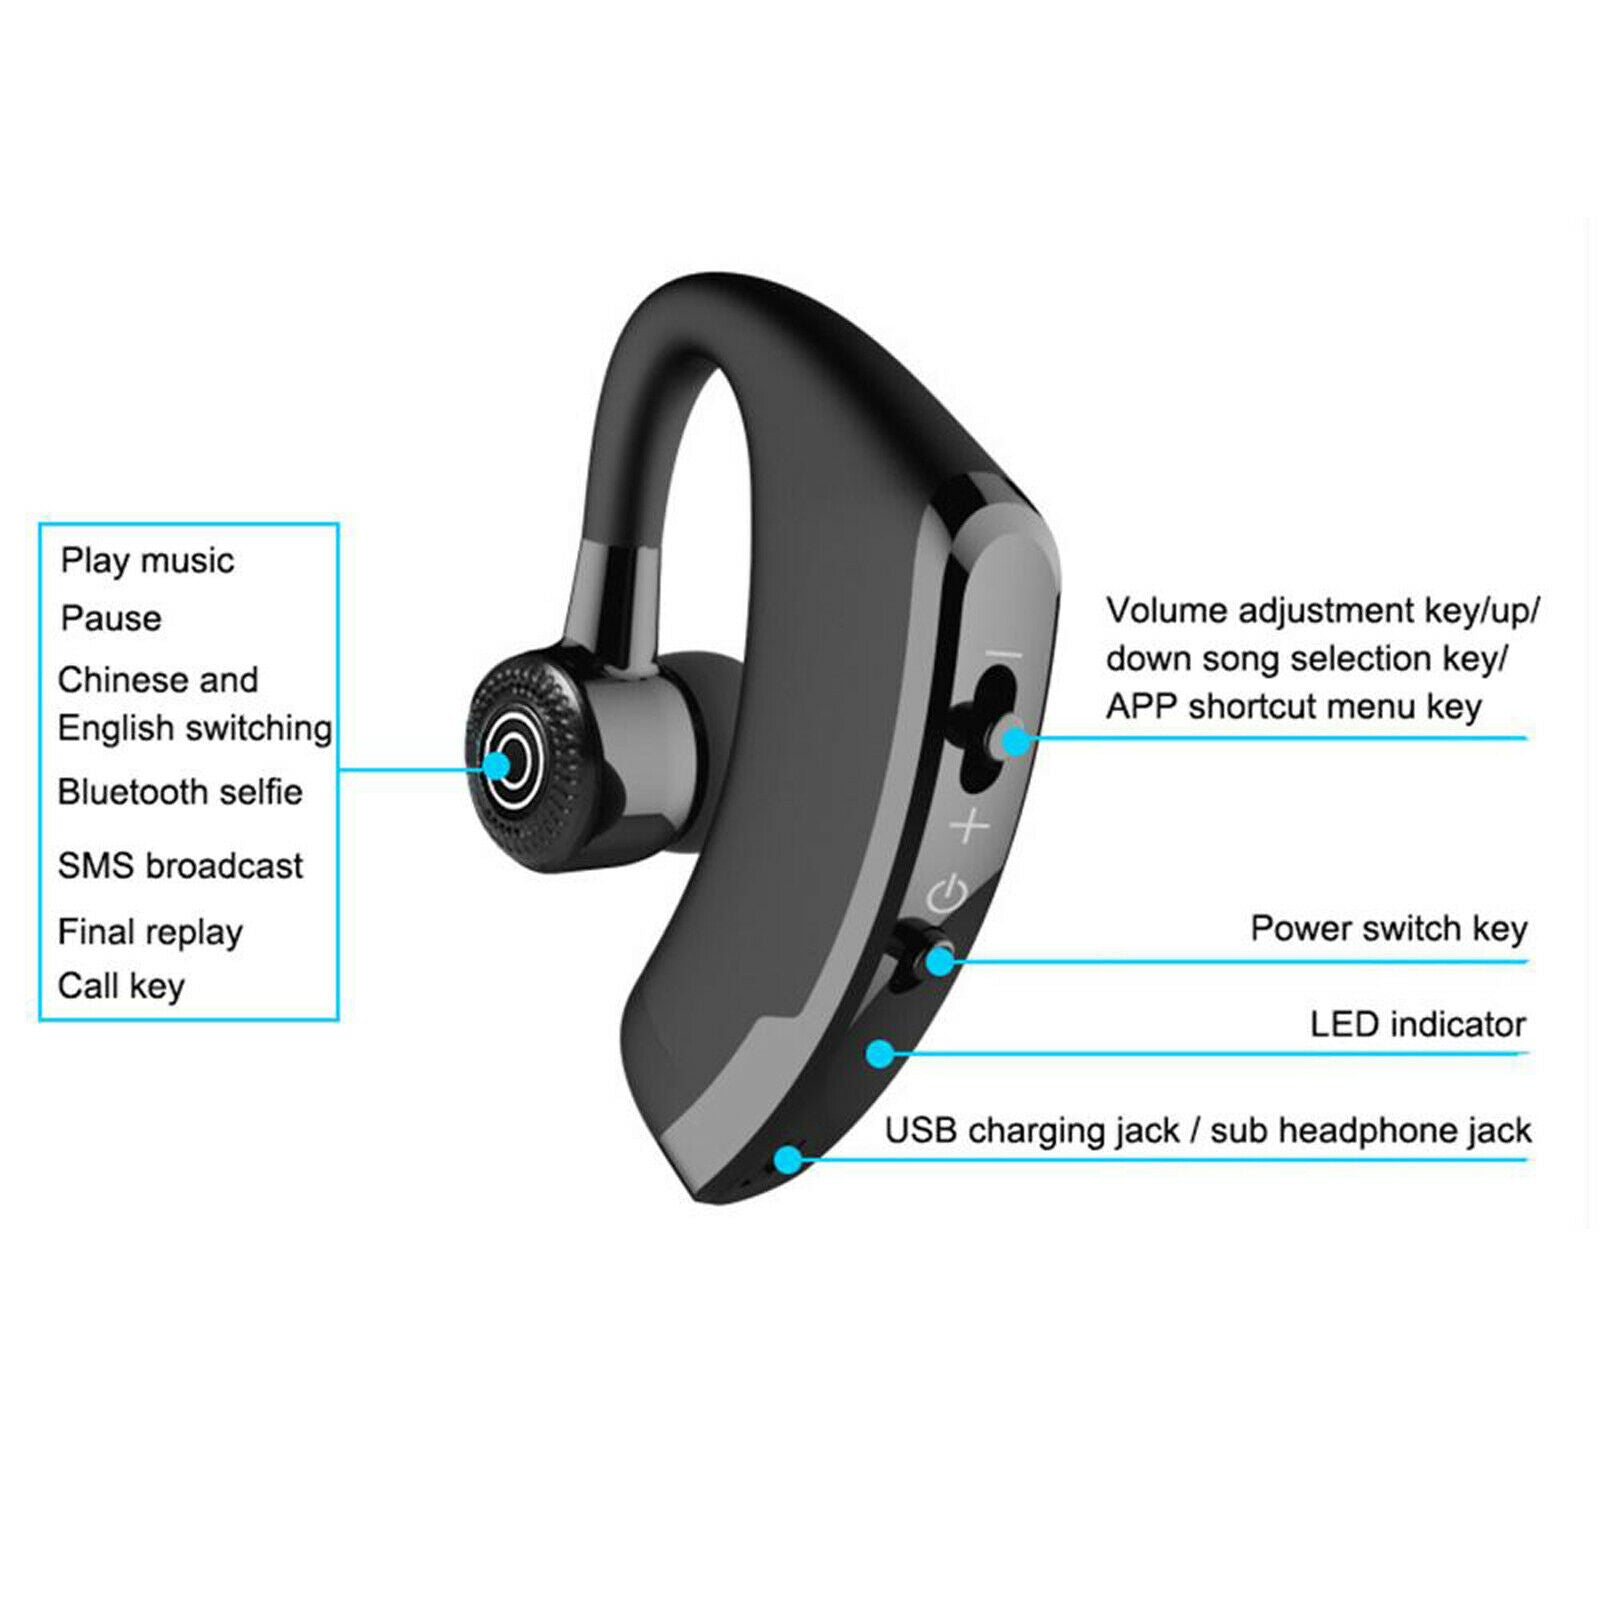 Wireless Handsfree Bluetooth Headset CVC6.0 for Cell Phone Driving Business